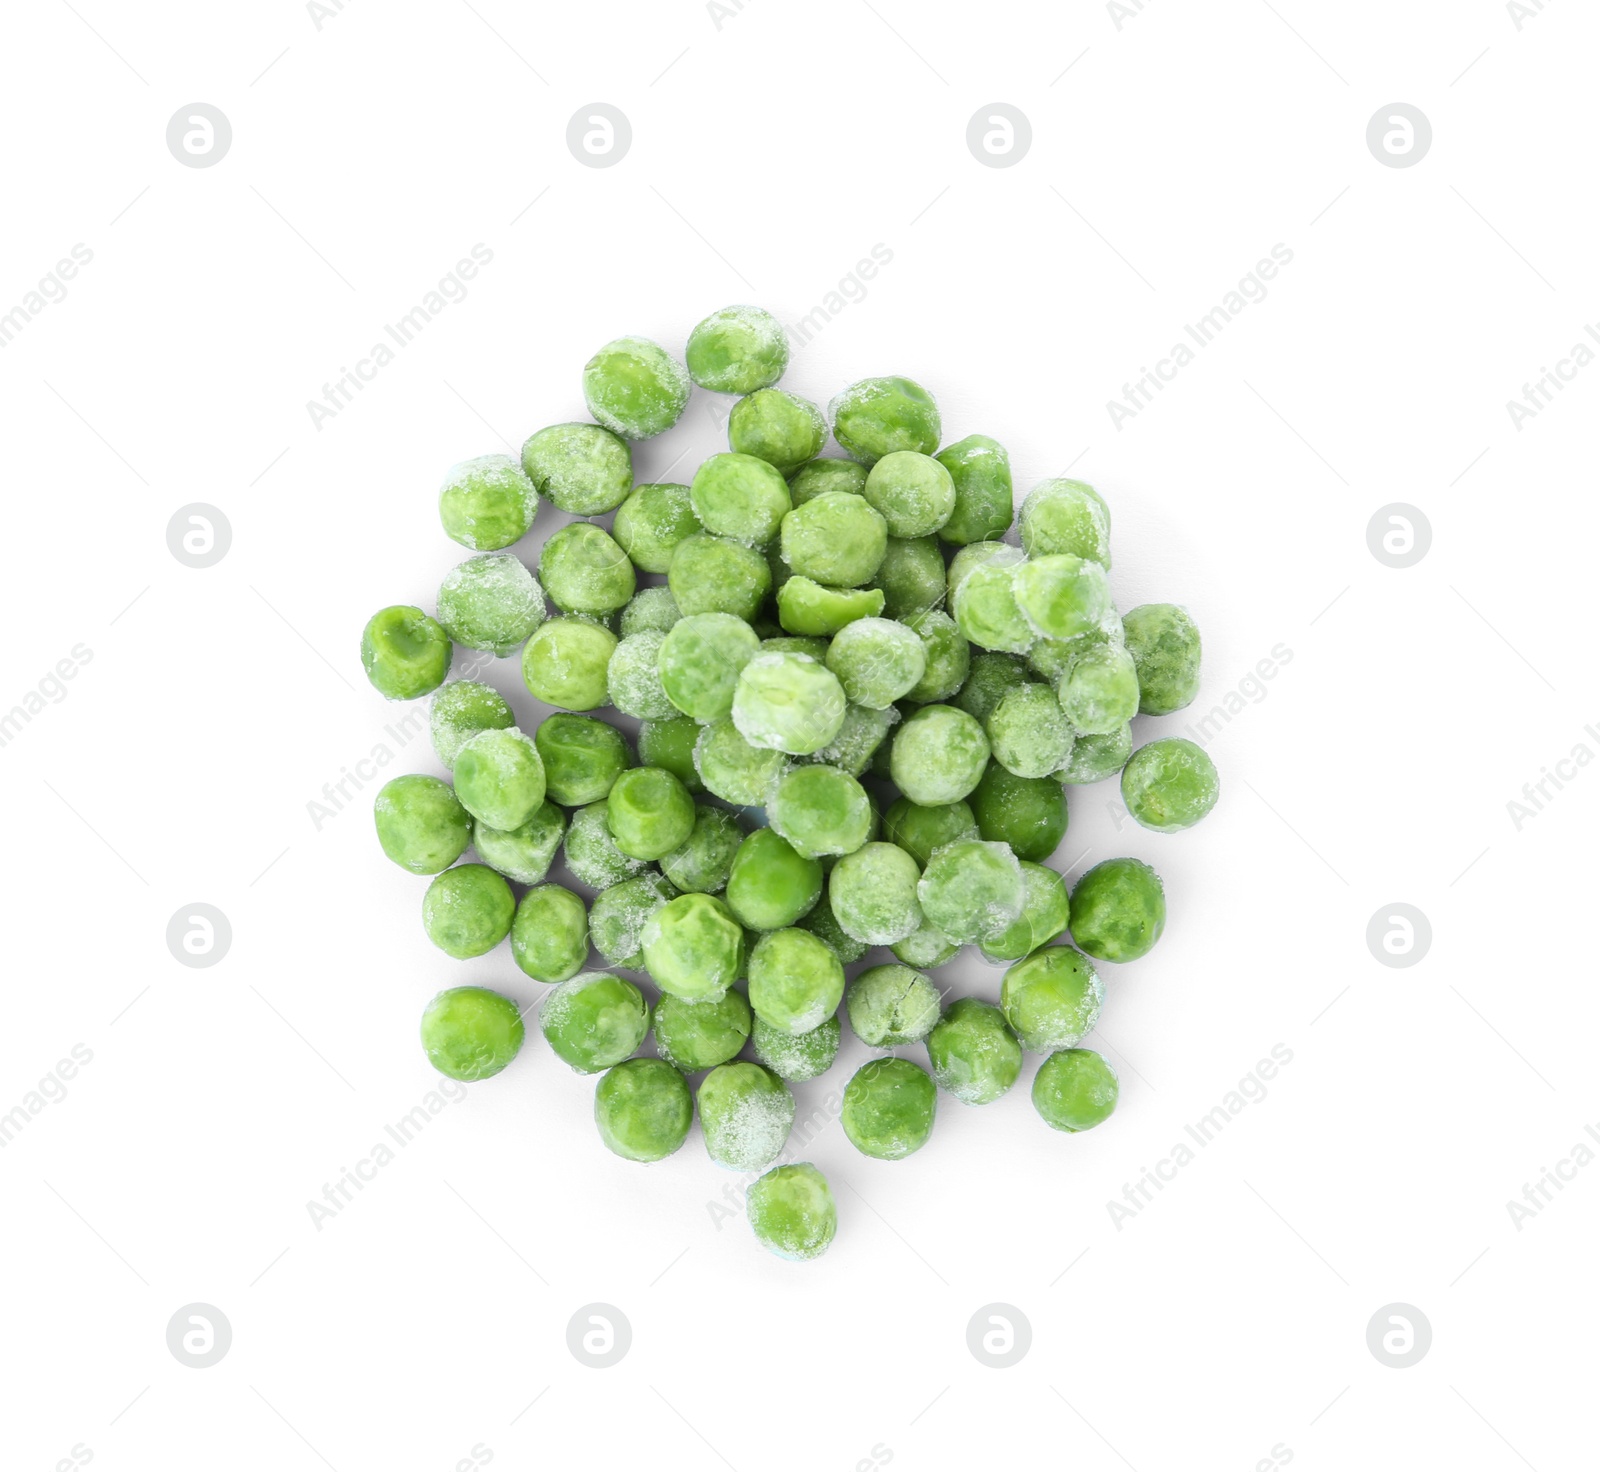 Photo of Frozen peas on white background. Vegetable preservation